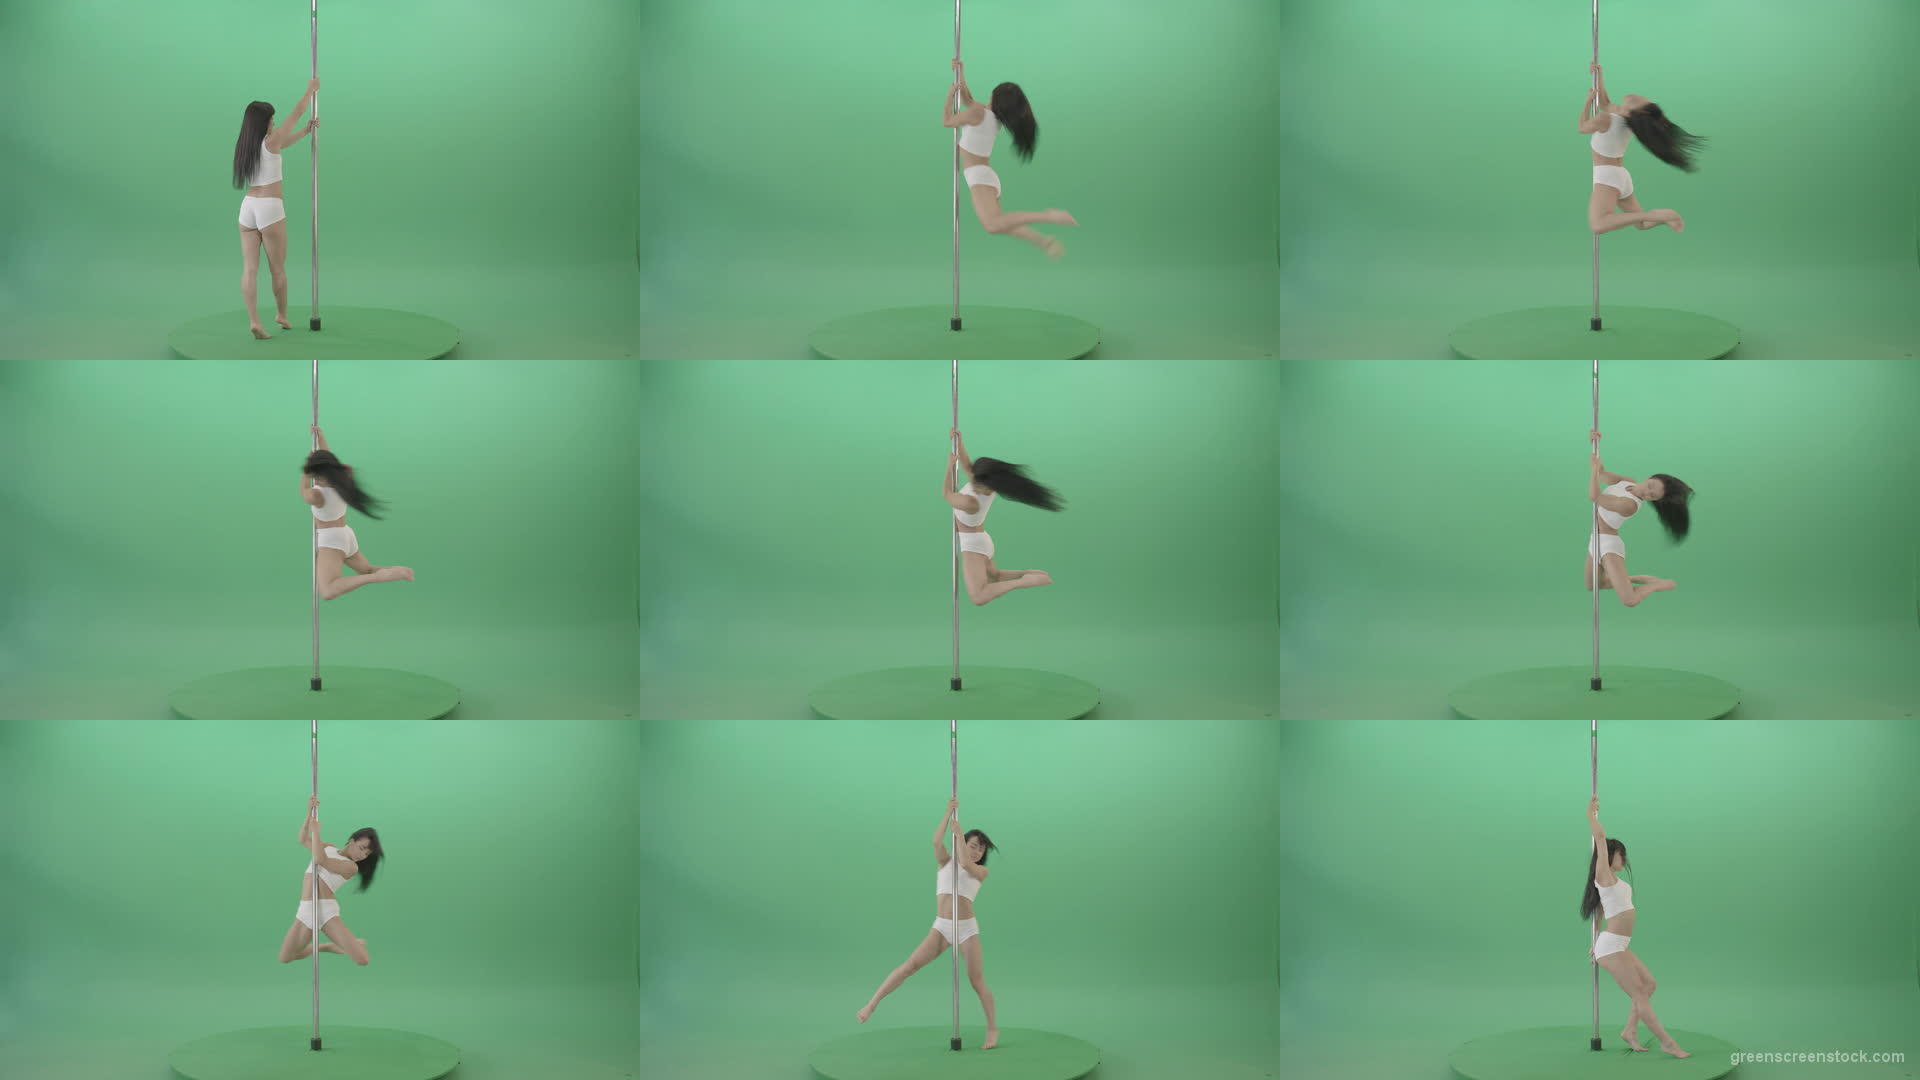 Green-Screen-Woman-spinning-gracefully-on-pole-dance-Video-Footage-1920 Green Screen Stock